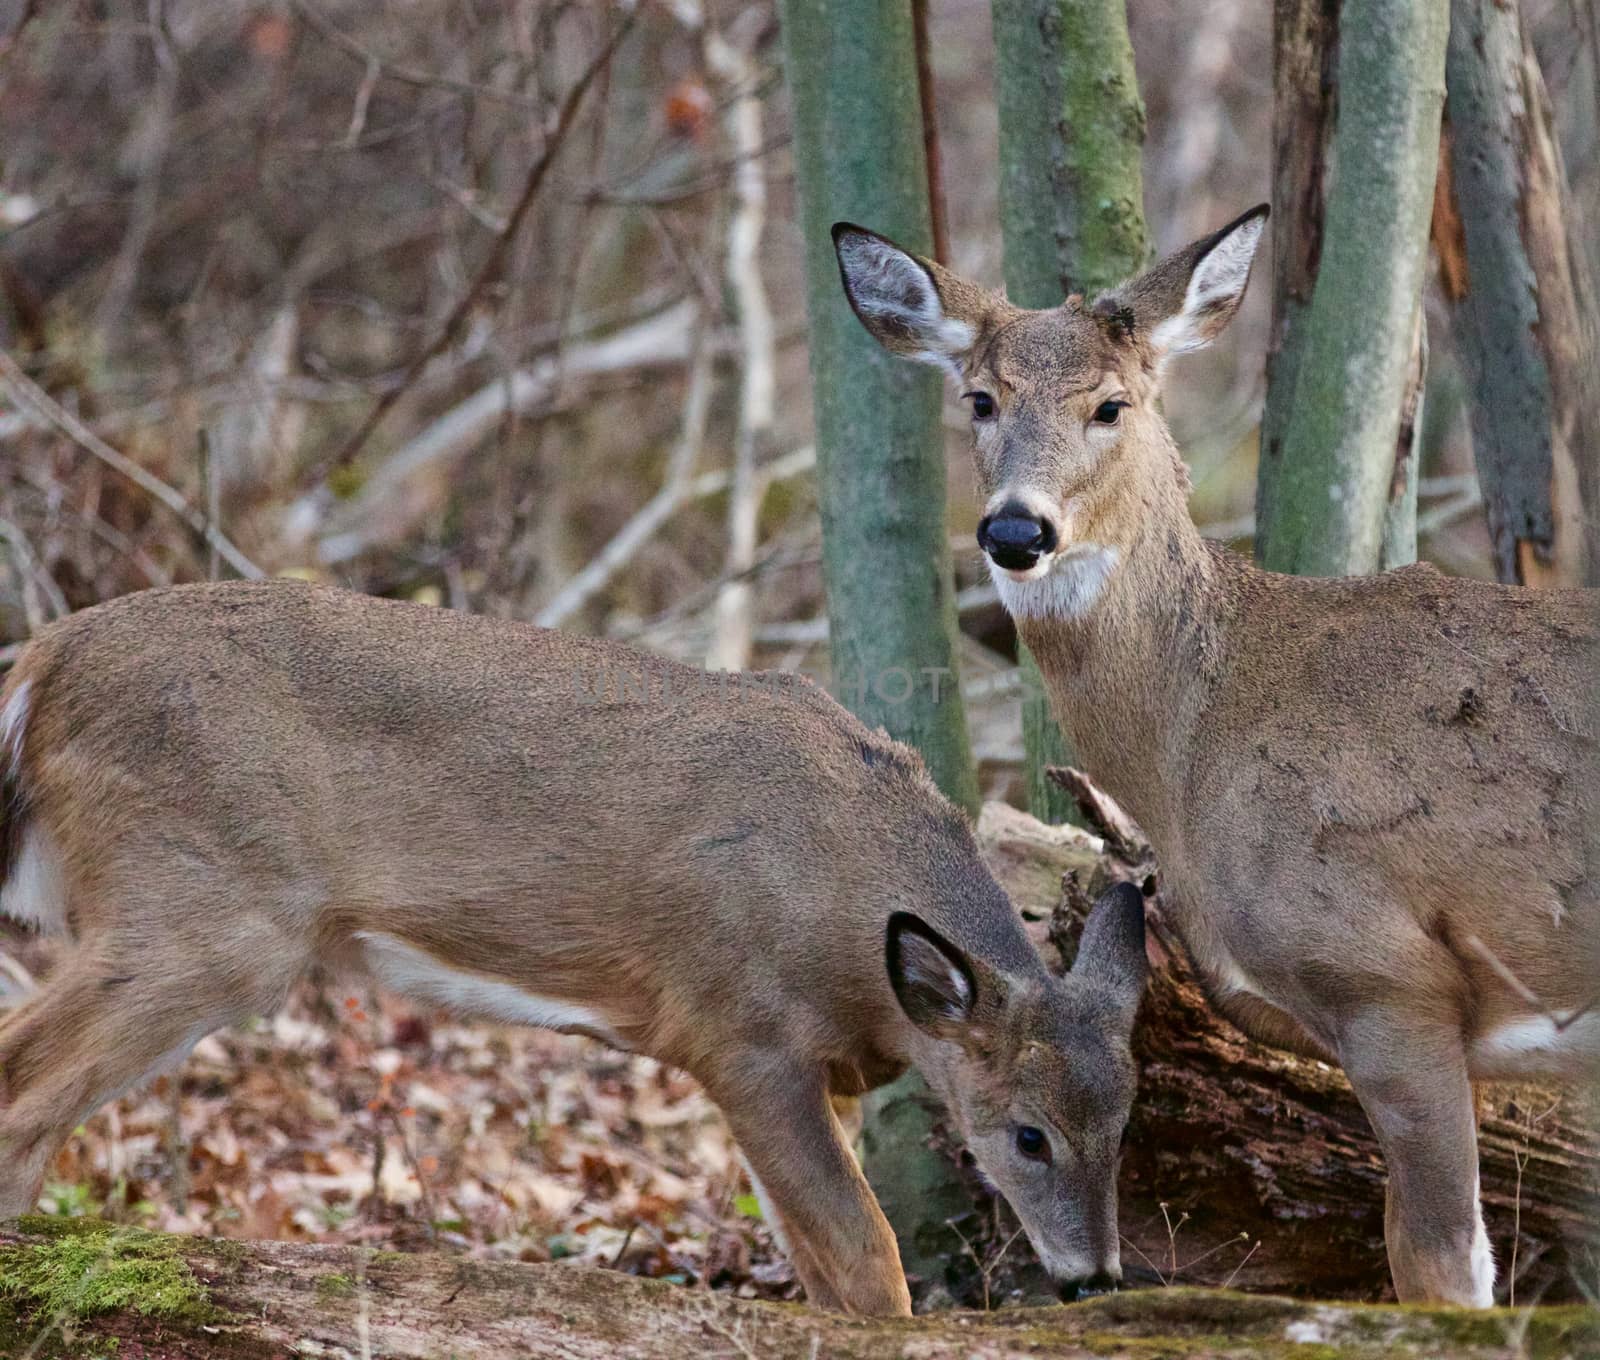 Photo of the pair of deers by teo